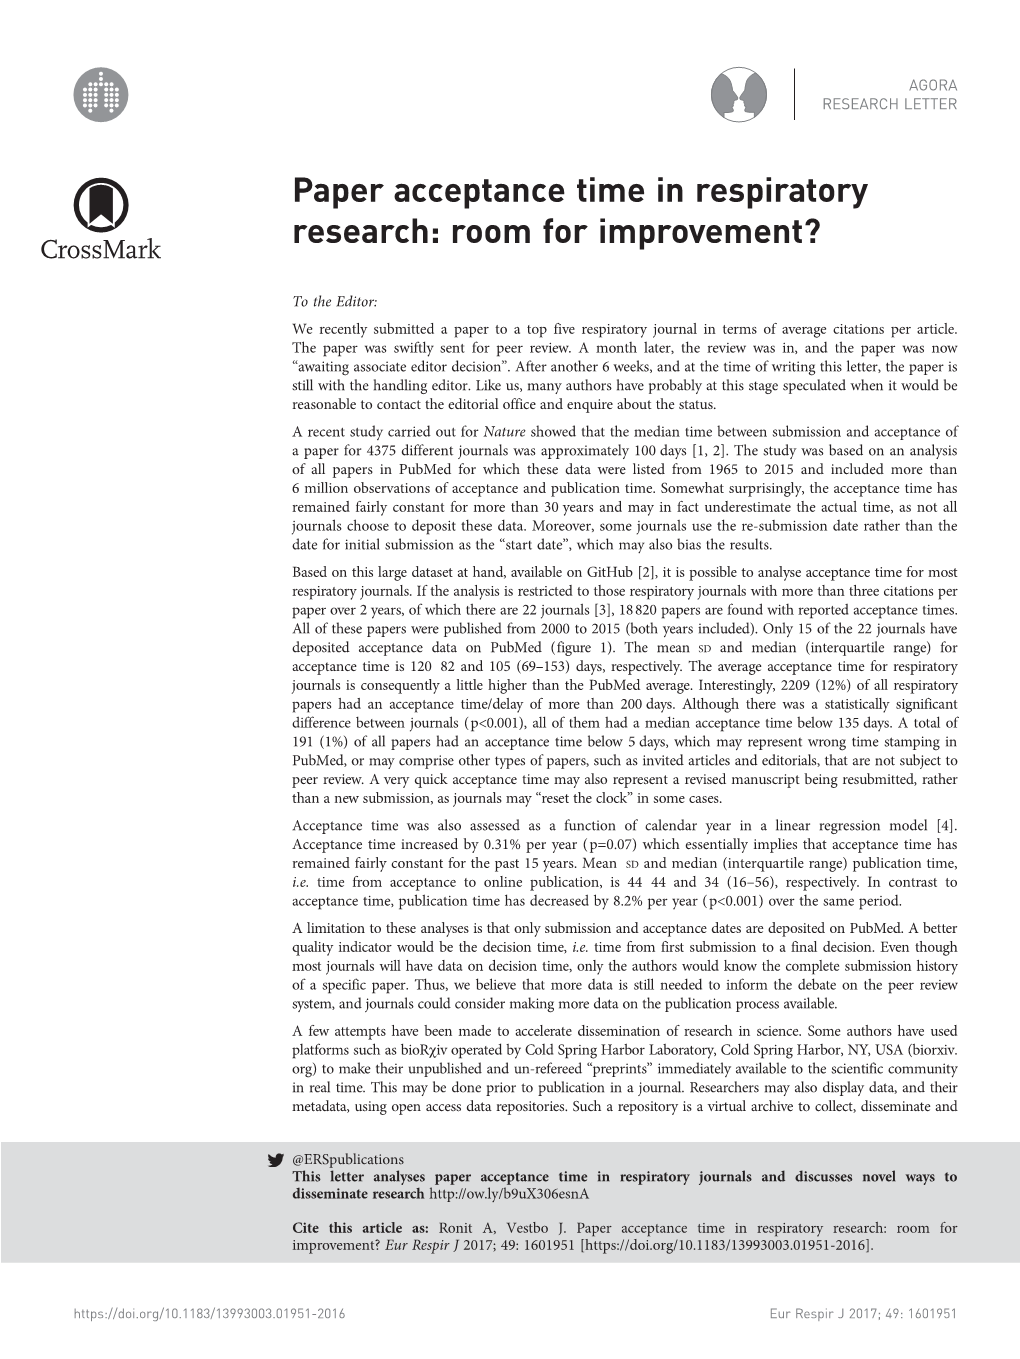 Paper Acceptance Time in Respiratory Research: Room for Improvement?